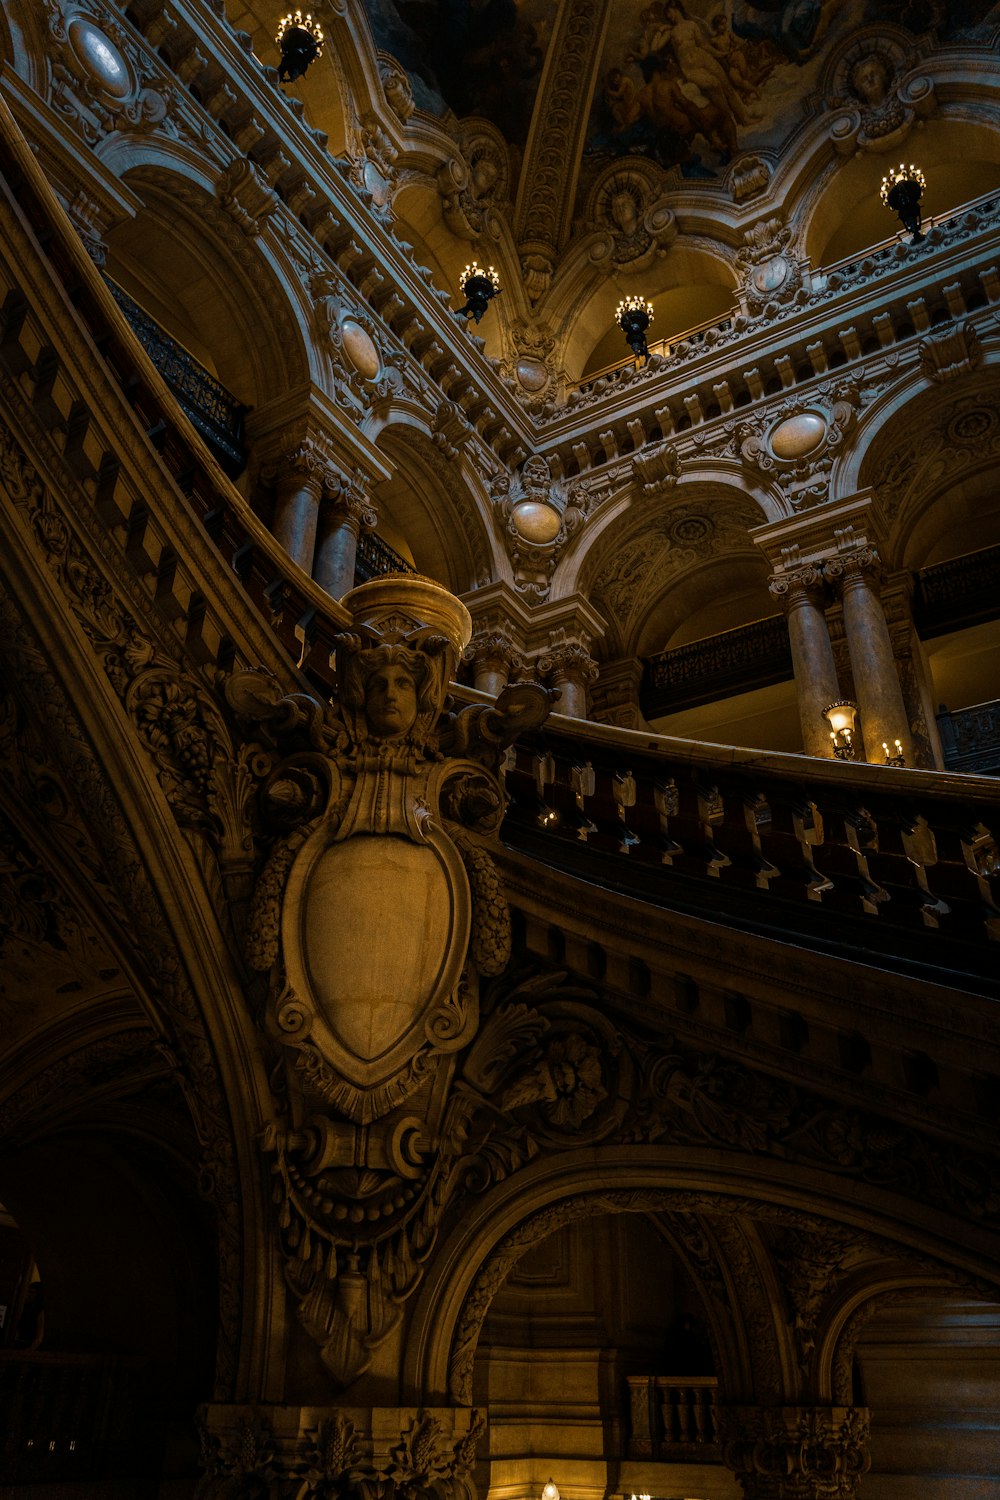 a very ornate building with a very high ceiling